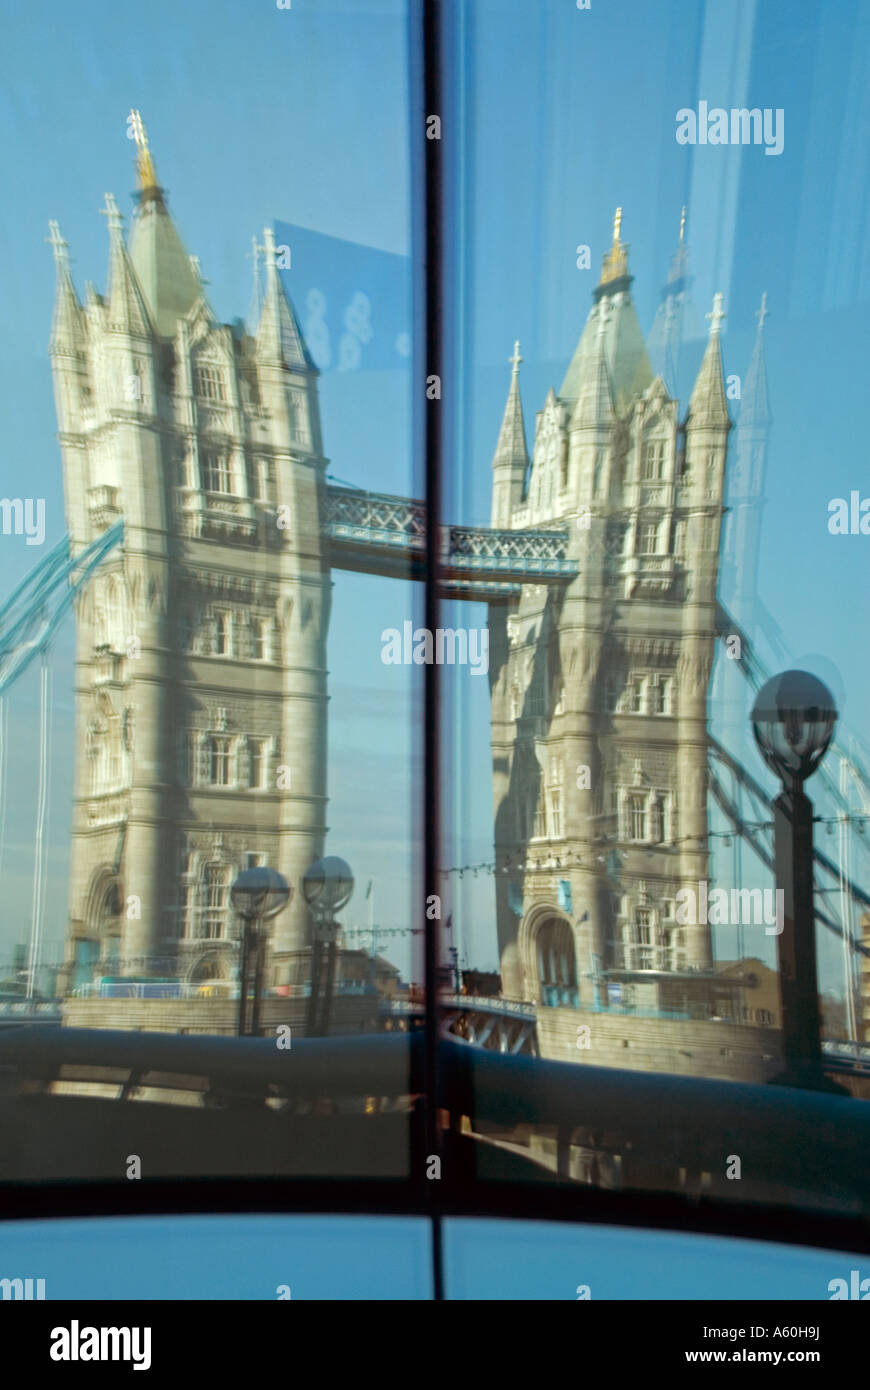 Abstract distorted vertical view of the reflection of Tower Bridge against a blue sky. Stock Photo